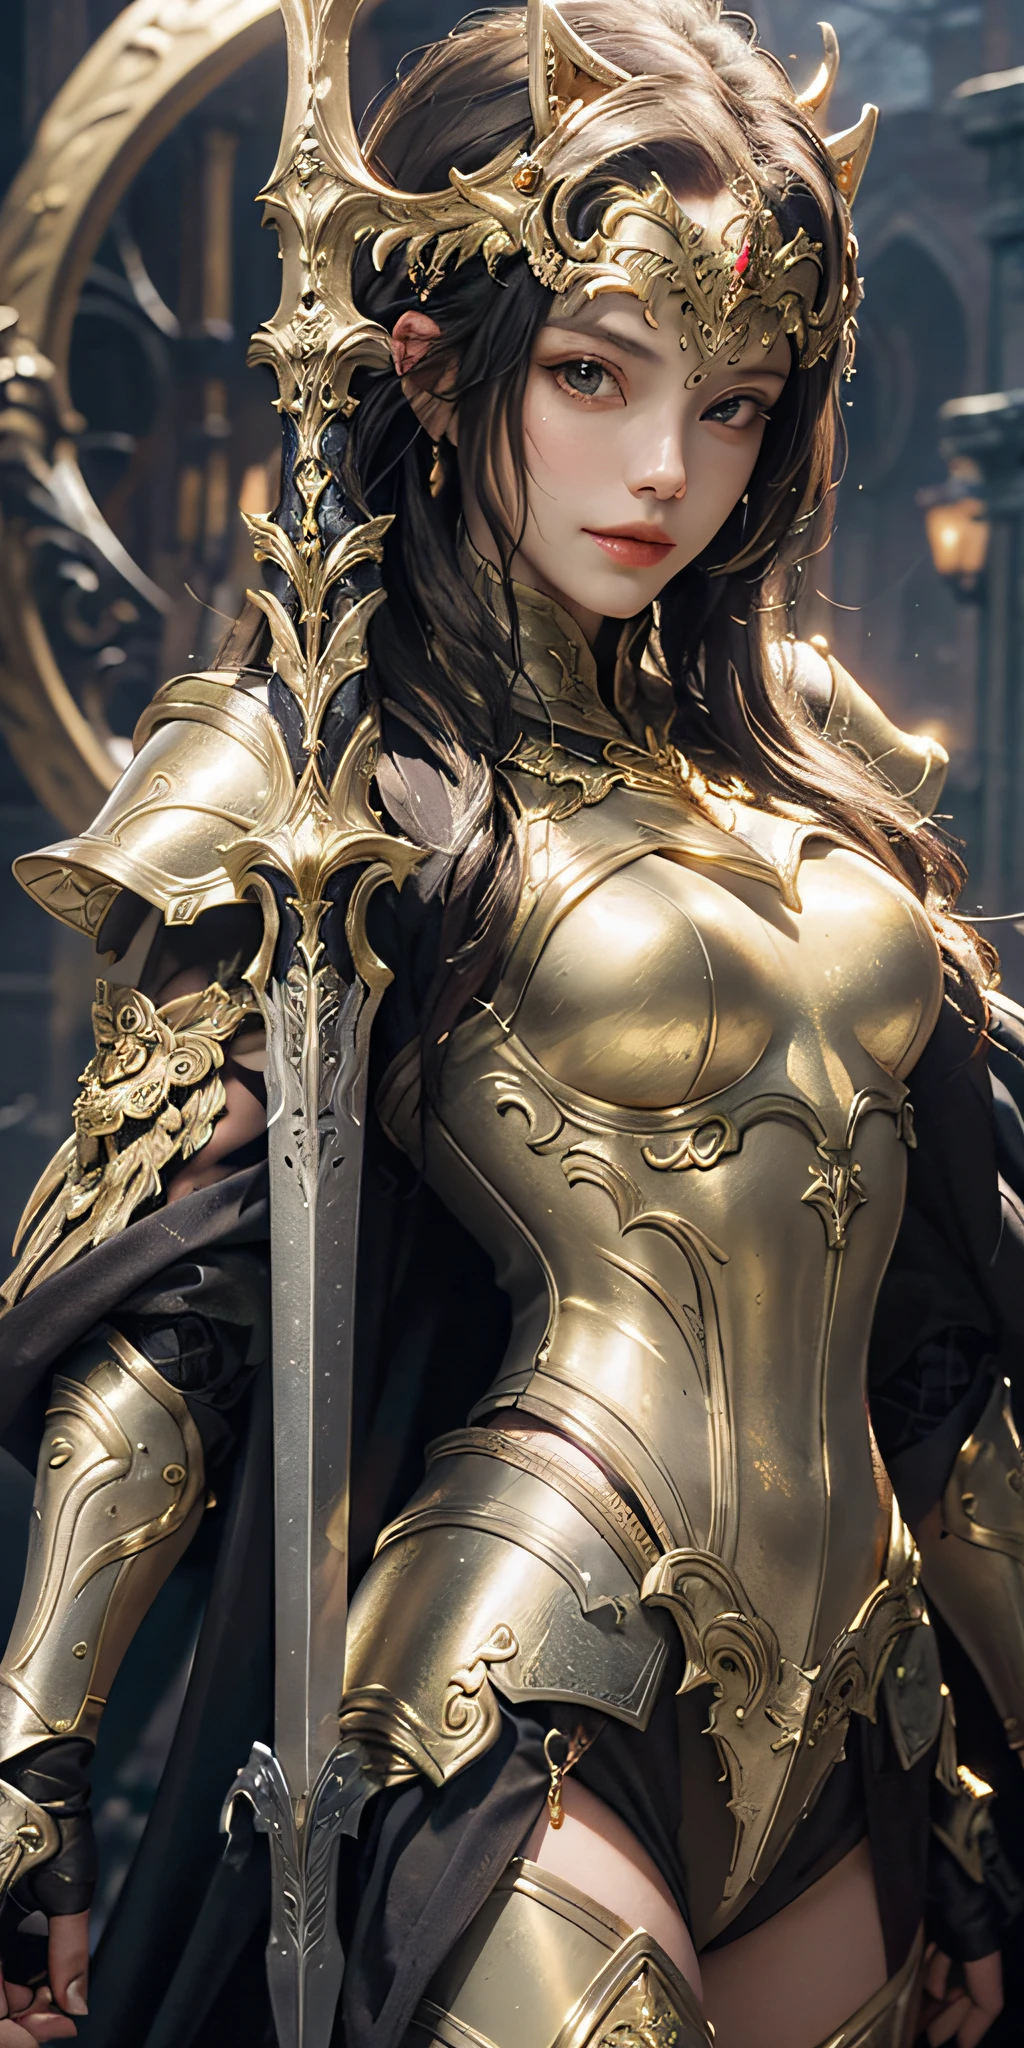 A girl in armor holds a golden sword, a close-up of golden heavy armor. Dramatic, stunning armor, face close-up, golden armor, detailed fantasy armor, black and gold armor, long white hair, delicate face, gorgeous jewelry, slender legs, smile, beautiful armor, golden armor, fantasy armor, intricate golden armor, golden armor, fantasy warrior in full armor, smooth golden armor, very stylish fantasy armor, black gold armor, light gold armor